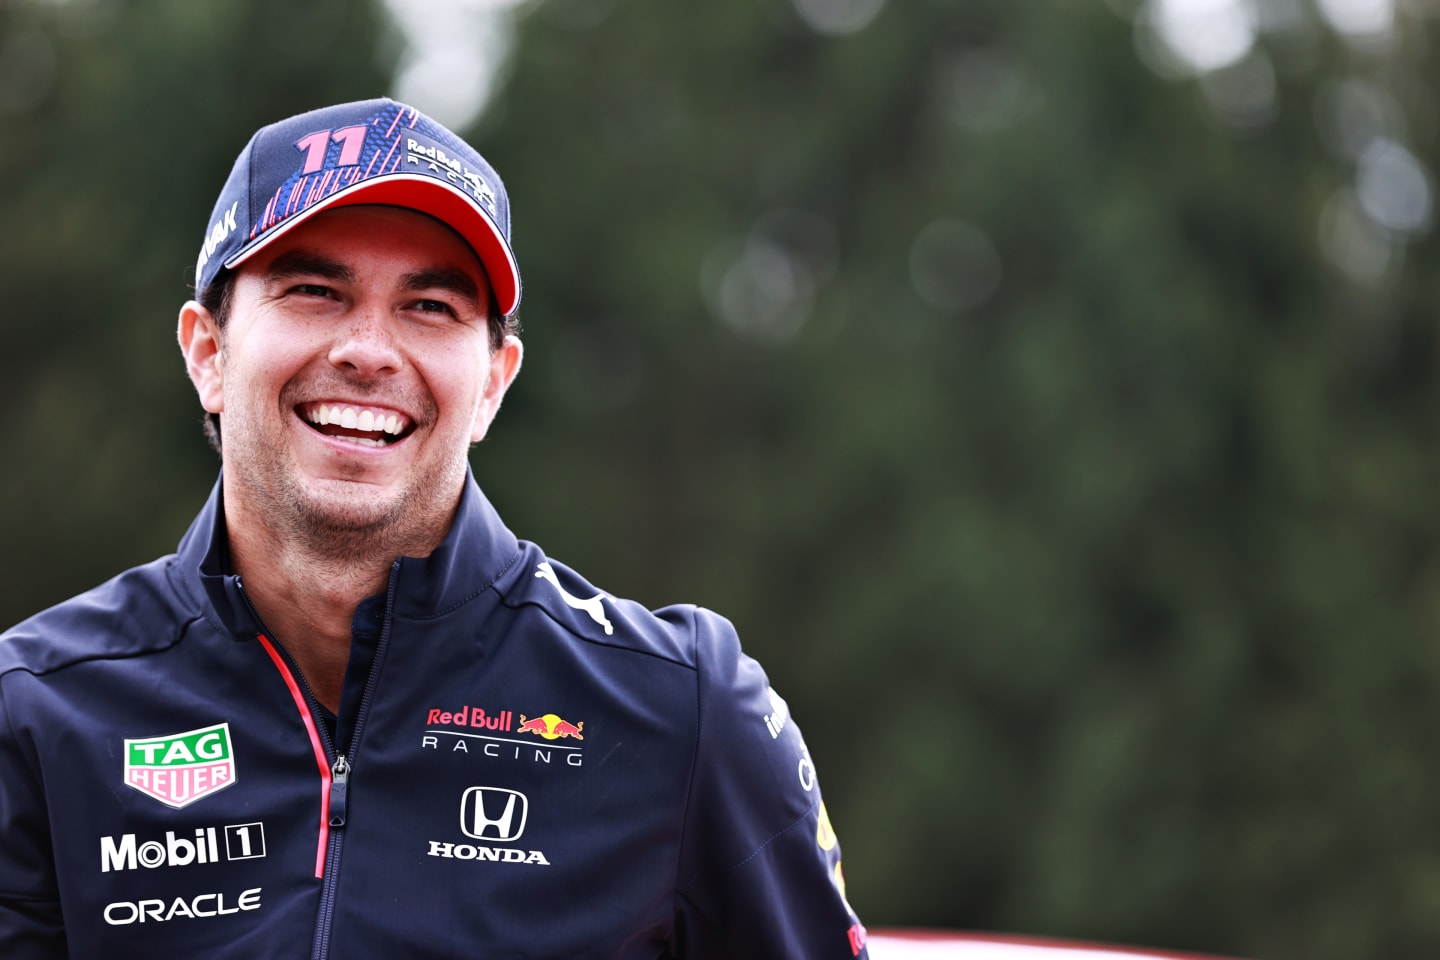 SPA, BELGIUM - AUGUST 26: Sergio Perez of Mexico and Red Bull Racing looks on in the Paddock during